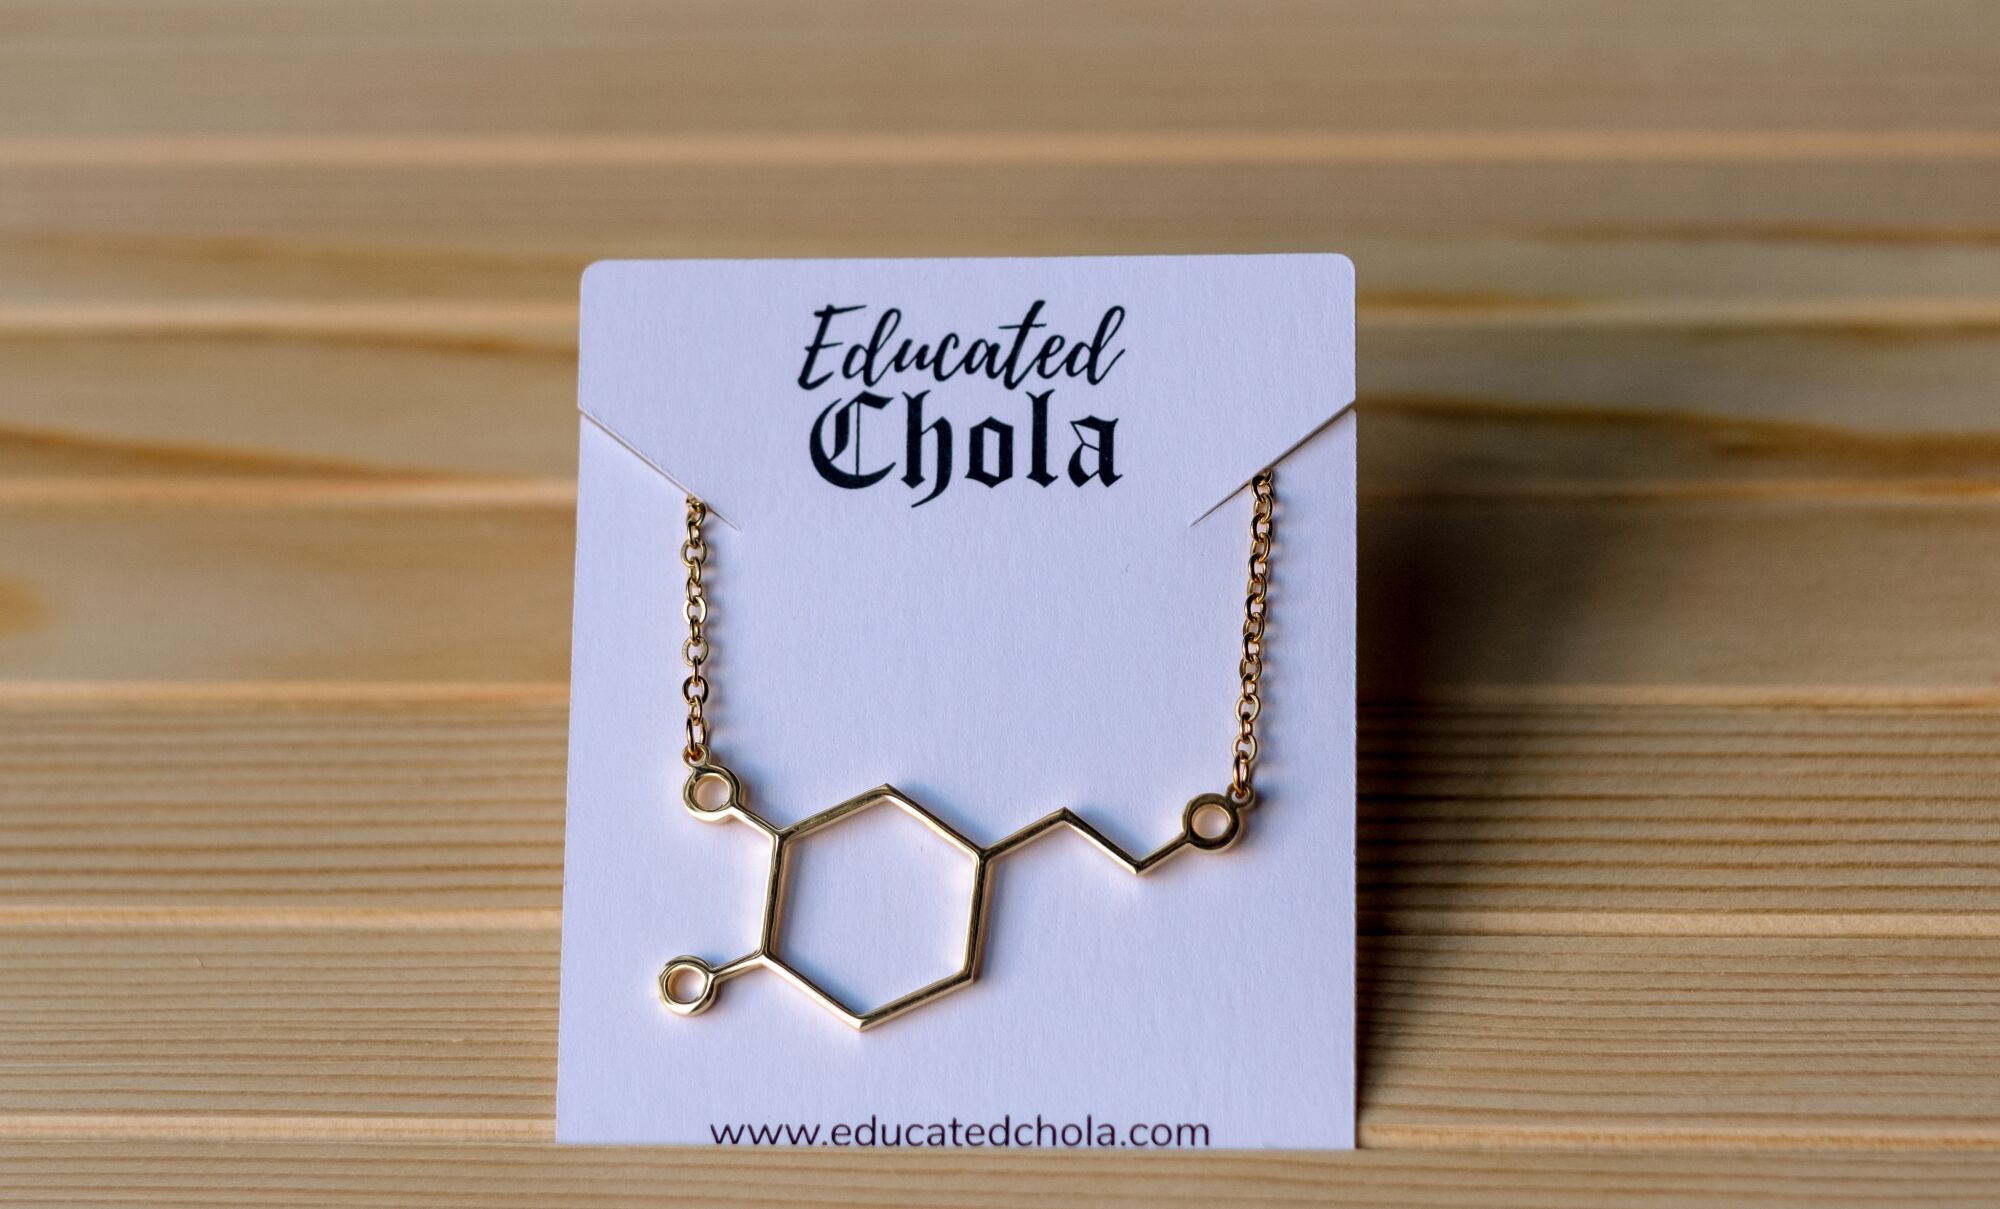 A gold necklace Educated Chola in the molecular structure of dopamine.